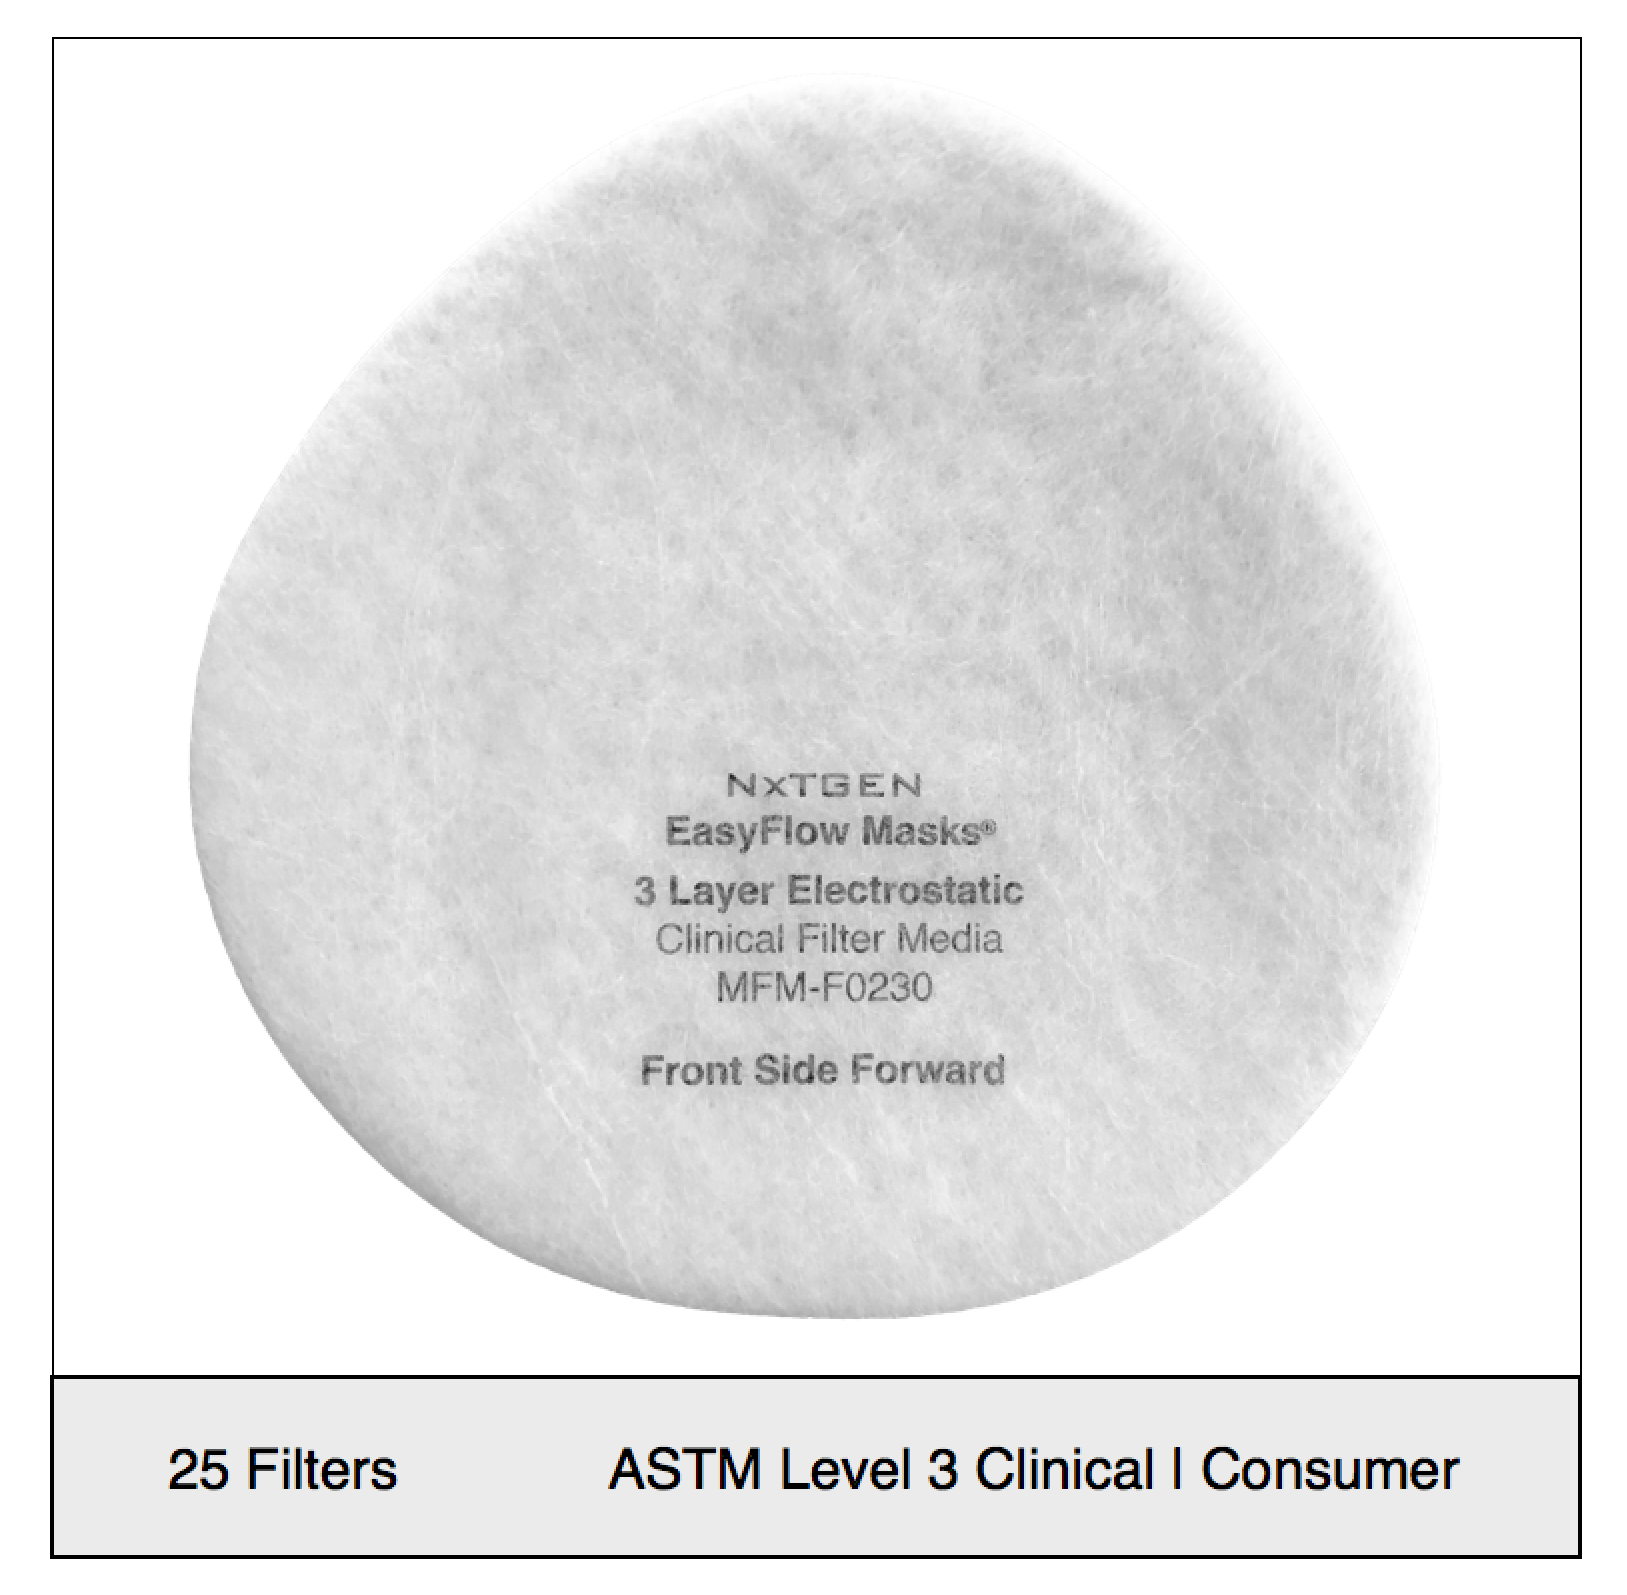 ASTM Level 3 Clinical | Consumer filter Set (25 qty)